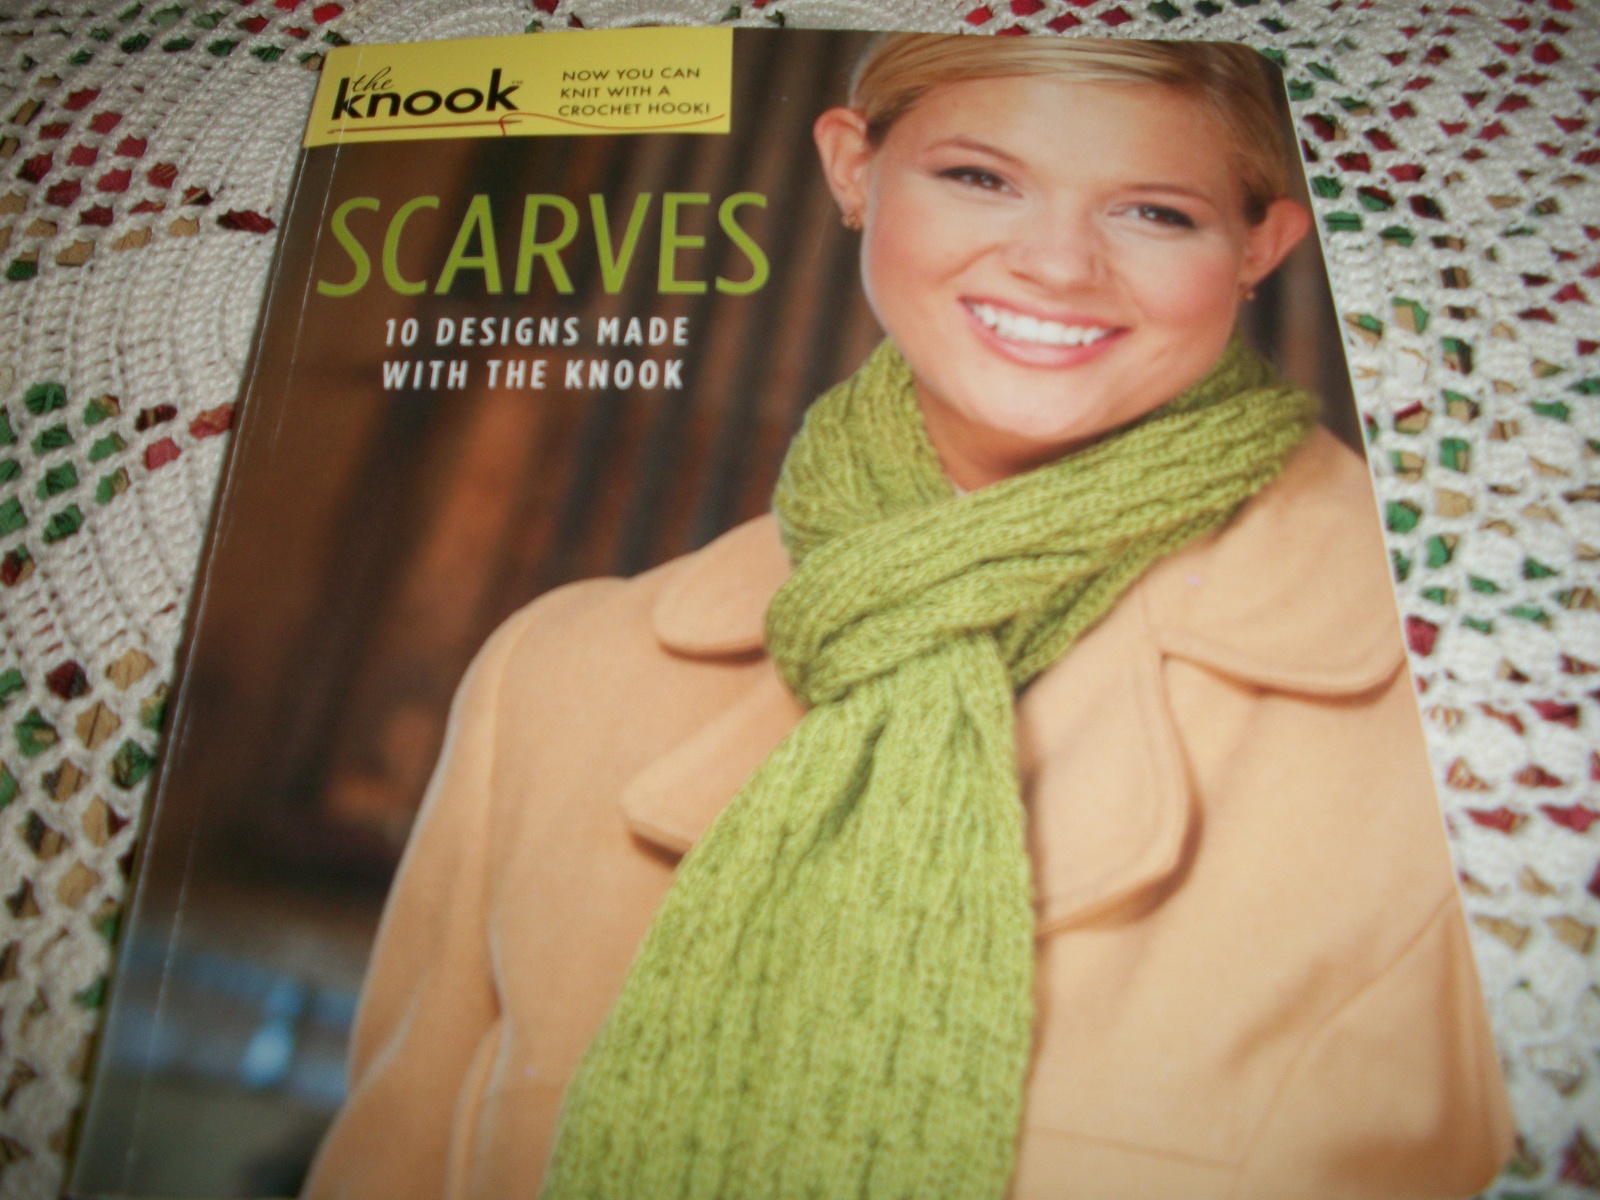 Scarves: 10 Designs Made With The Knook - $5.00